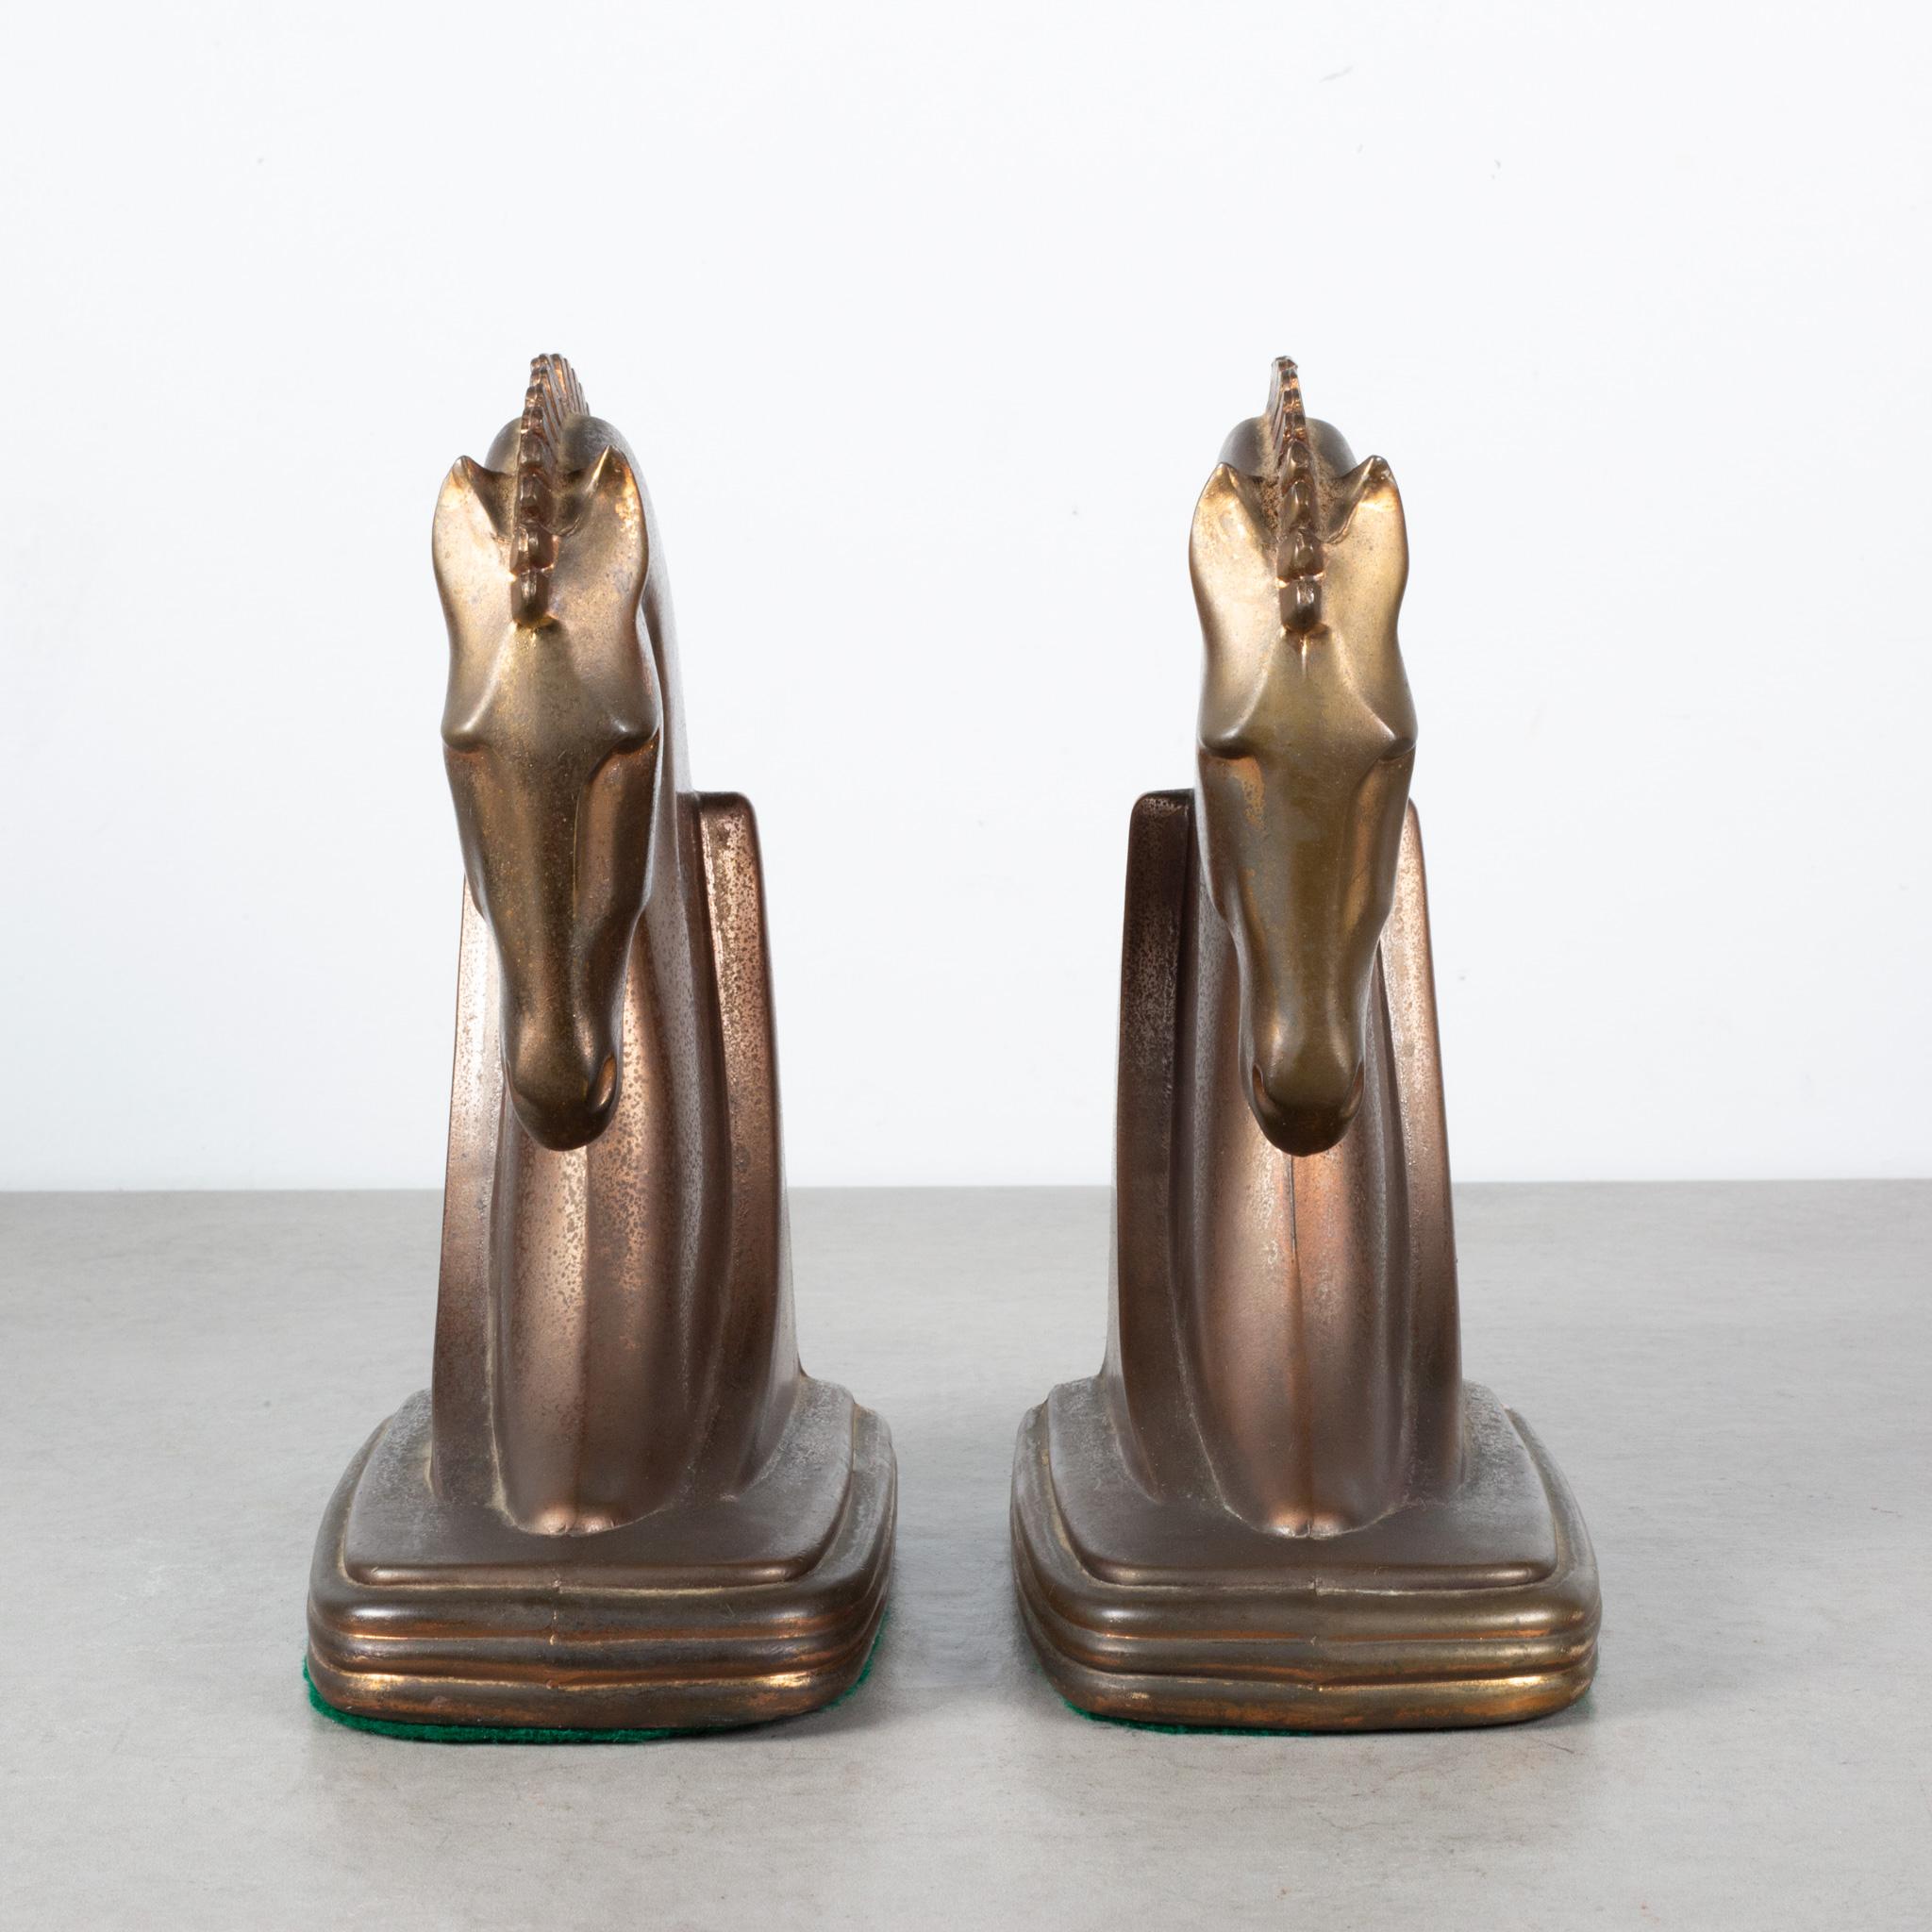 Art Deco Bronze Machine Age Trojan Horse Bookends by Dodge Inc. C.1930  (FREE SHIPPING)